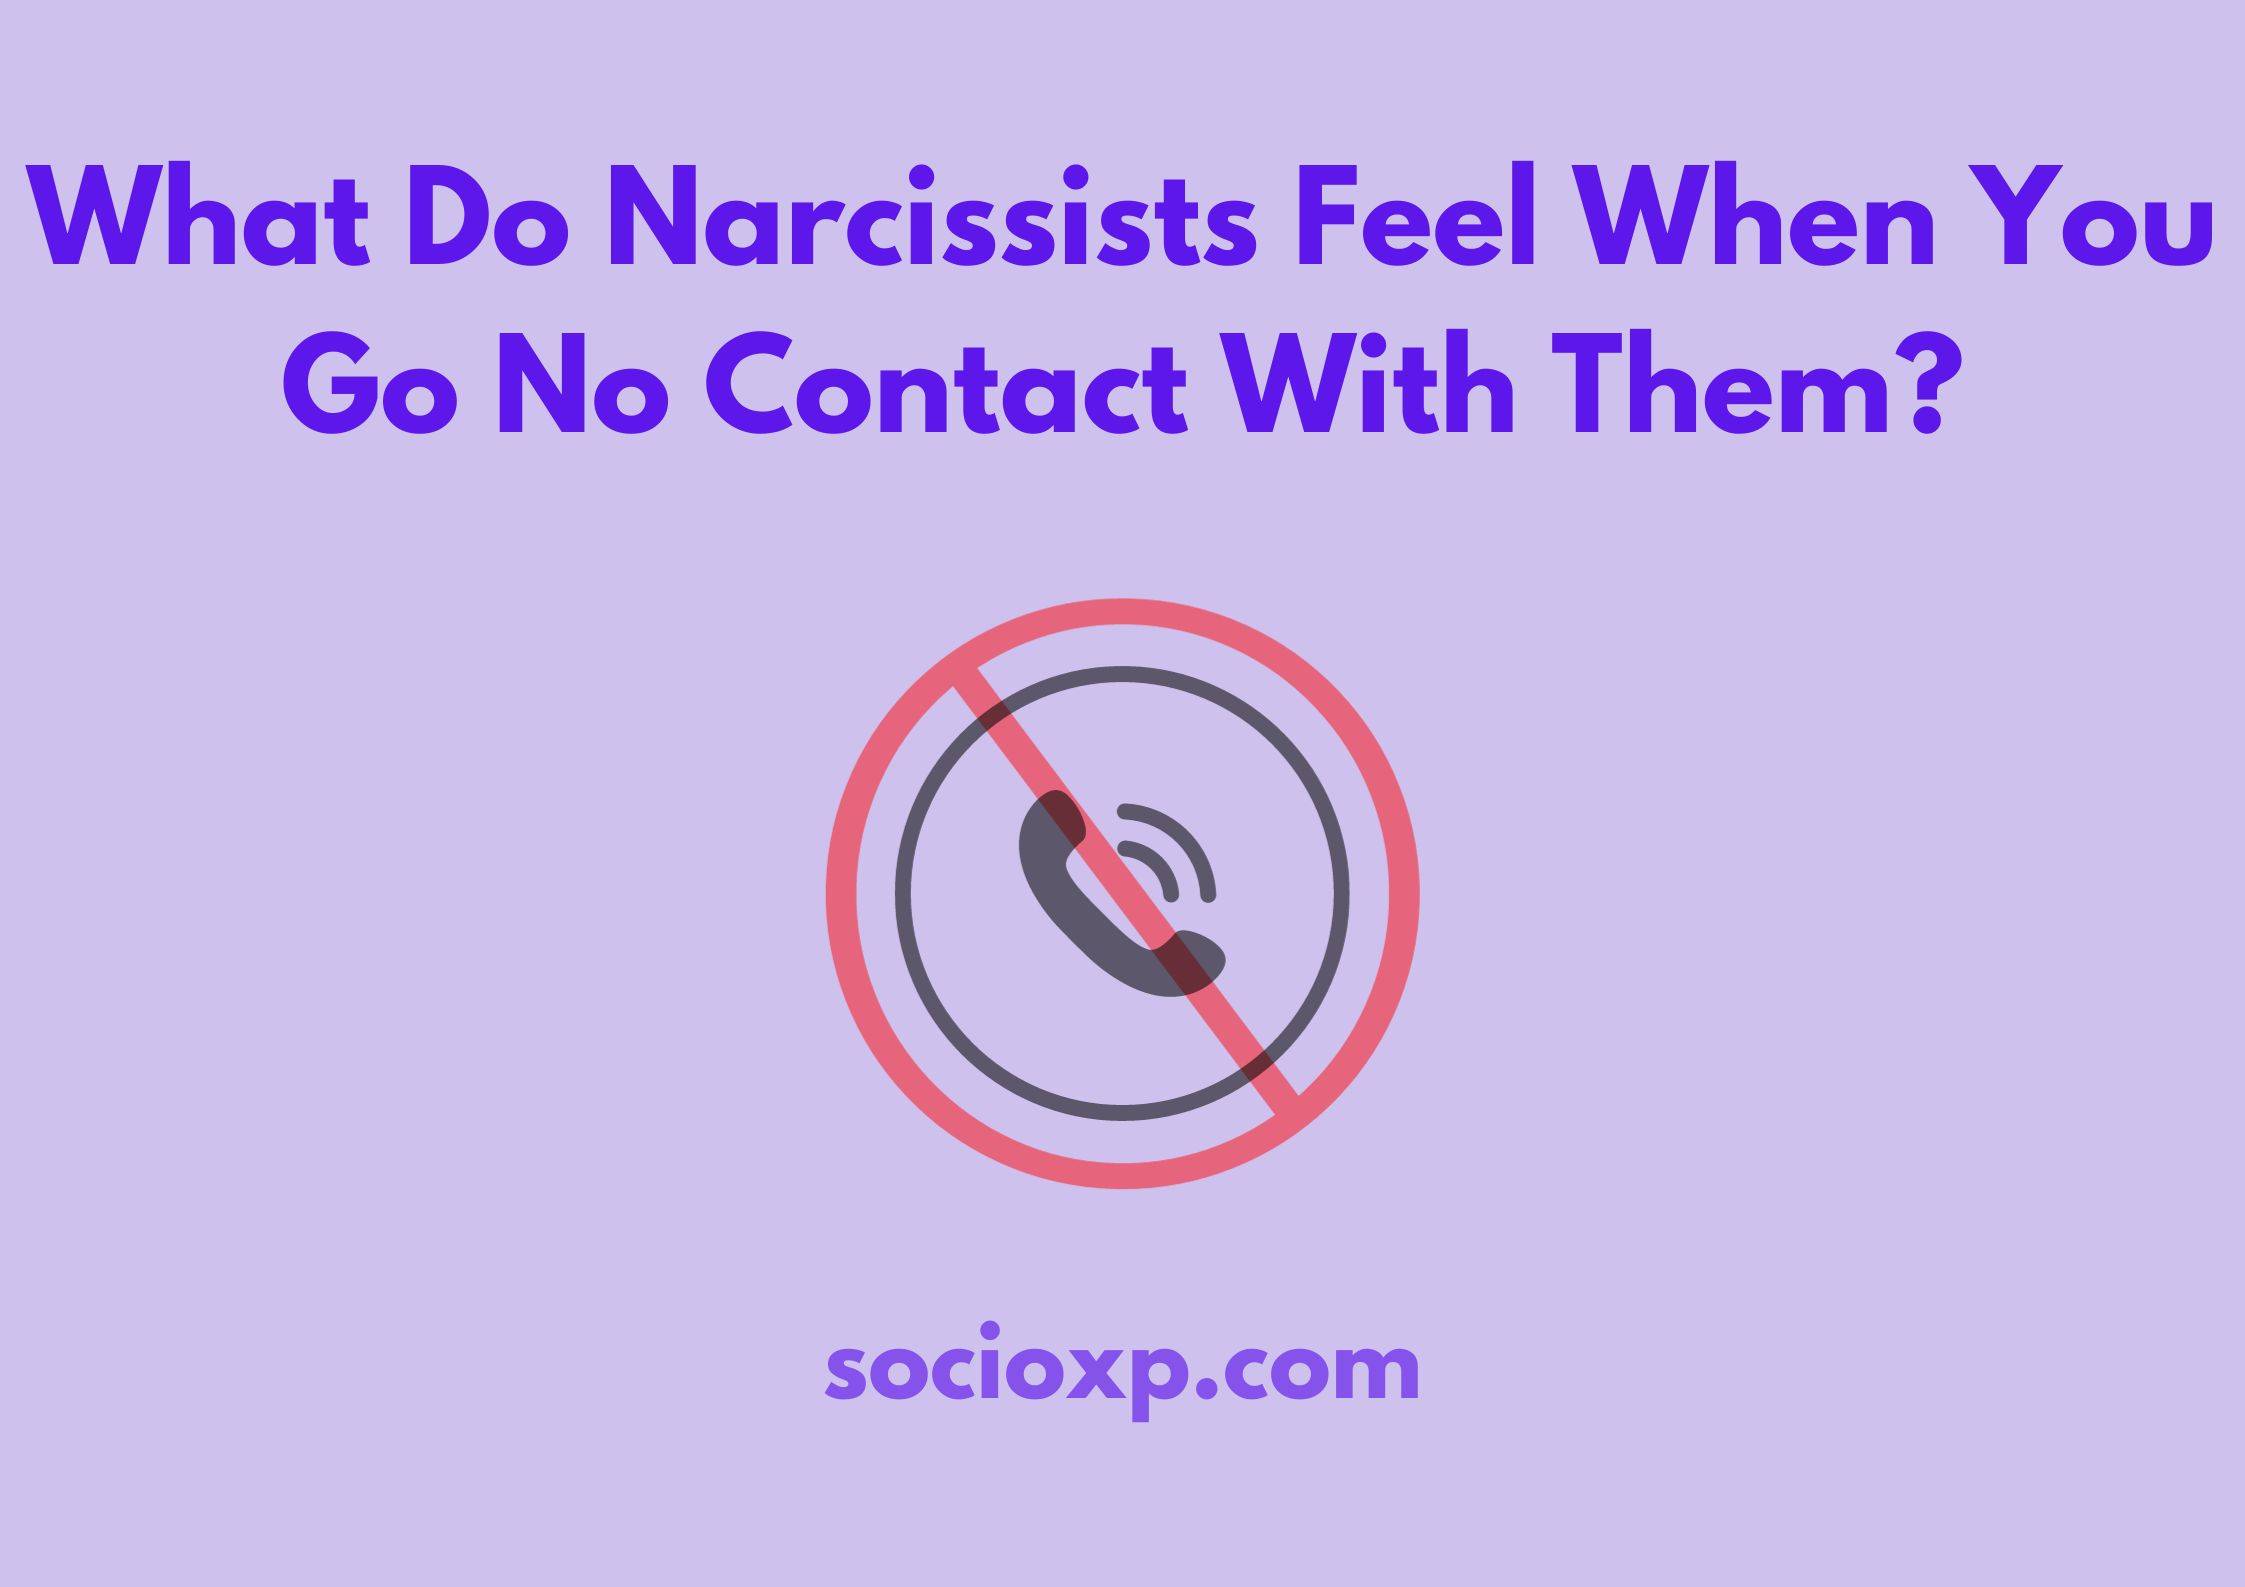 What Do Narcissists Feel When You Go No Contact With Them?